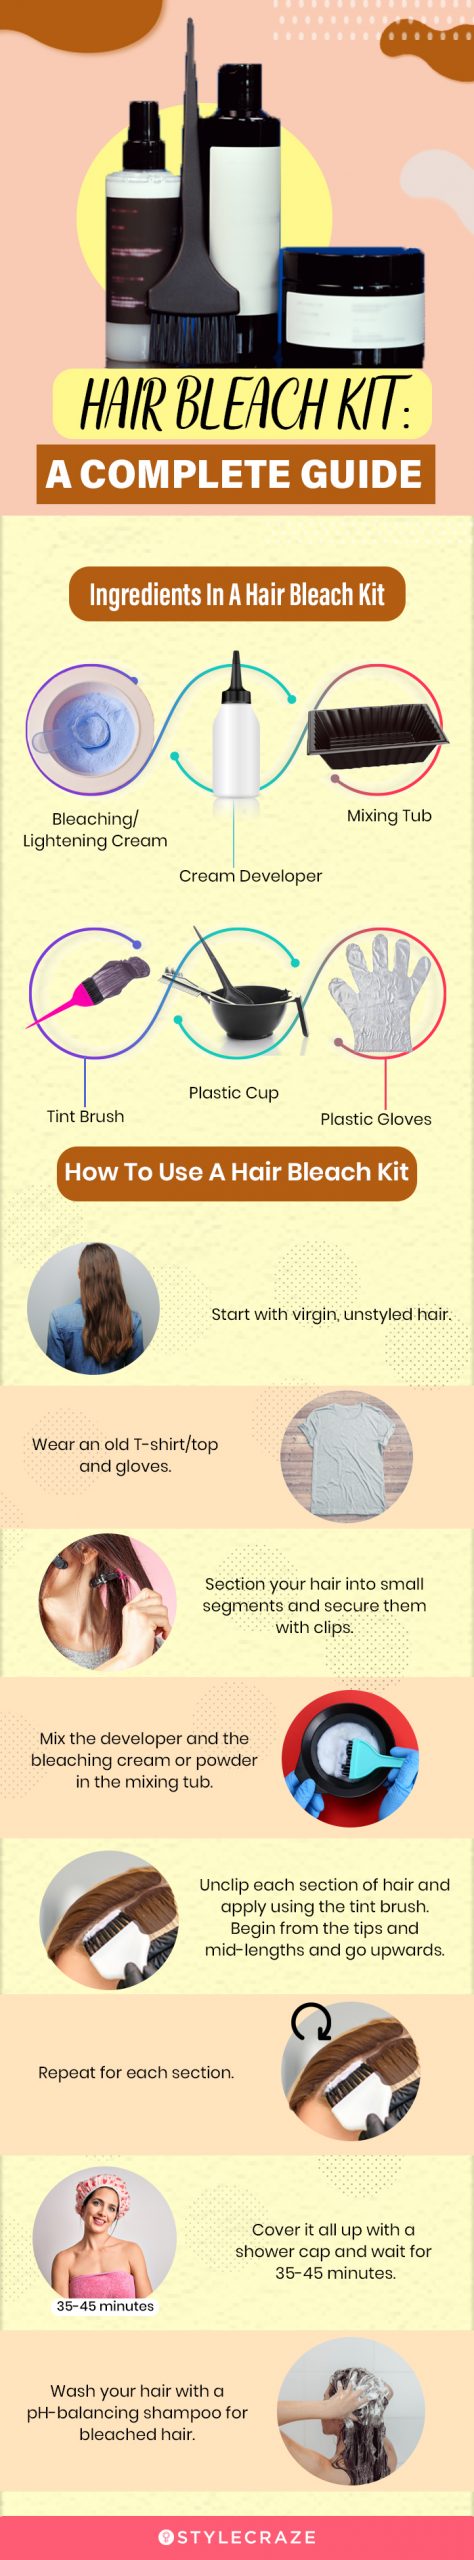 Hair Bleach Kit: A Complete Guide [infographic]